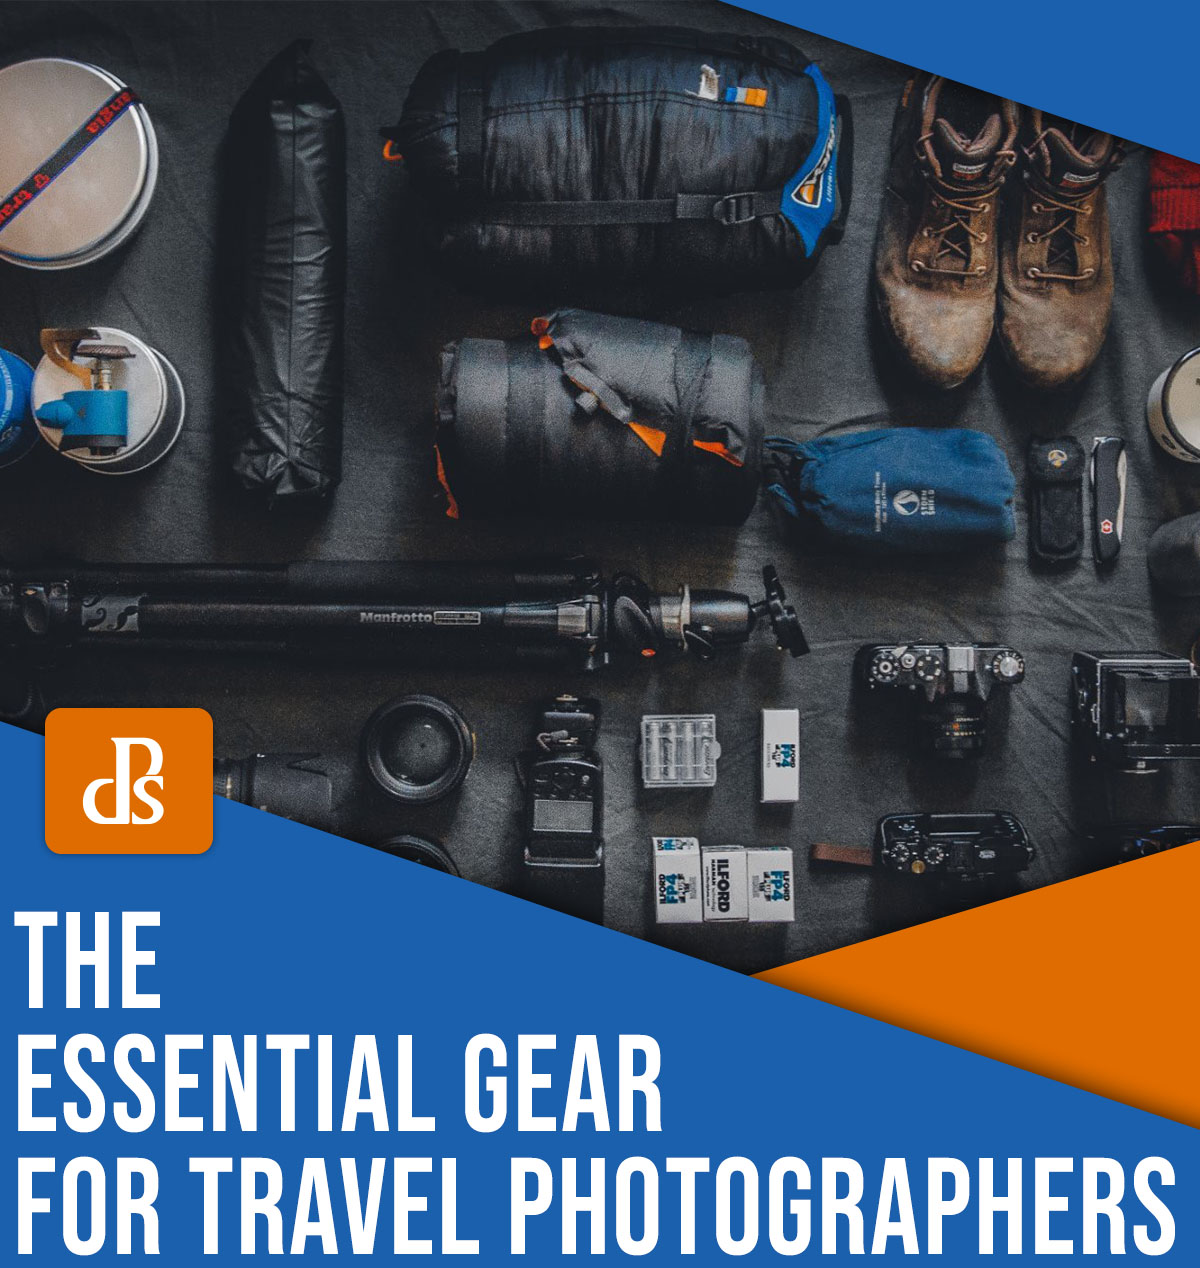 The essential gear for travel photographers